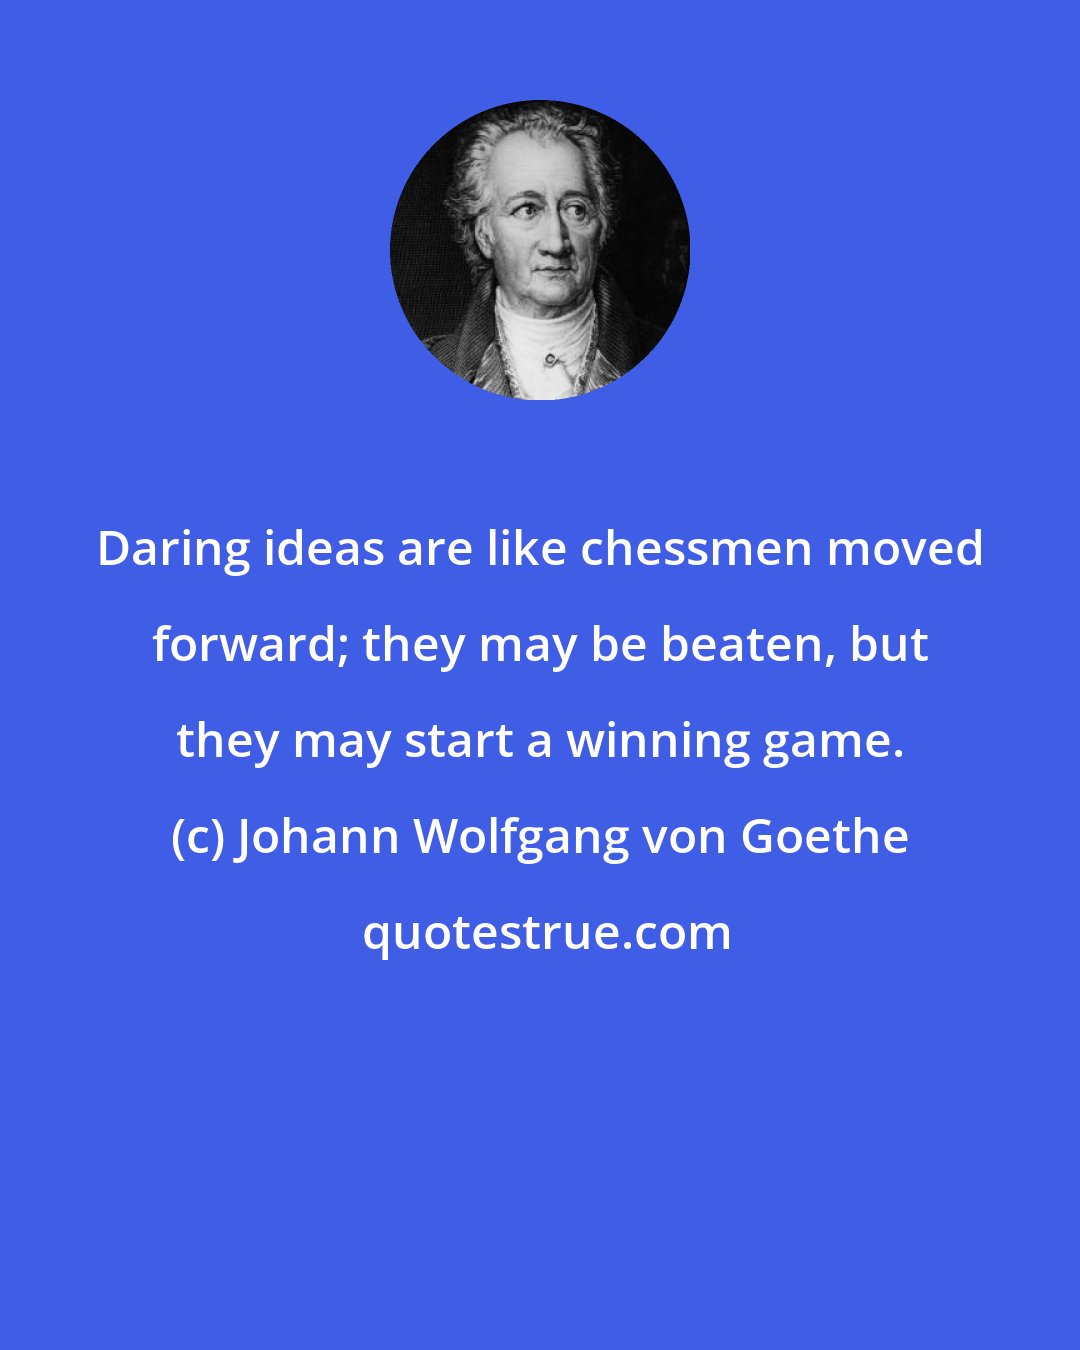 Johann Wolfgang von Goethe: Daring ideas are like chessmen moved forward; they may be beaten, but they may start a winning game.